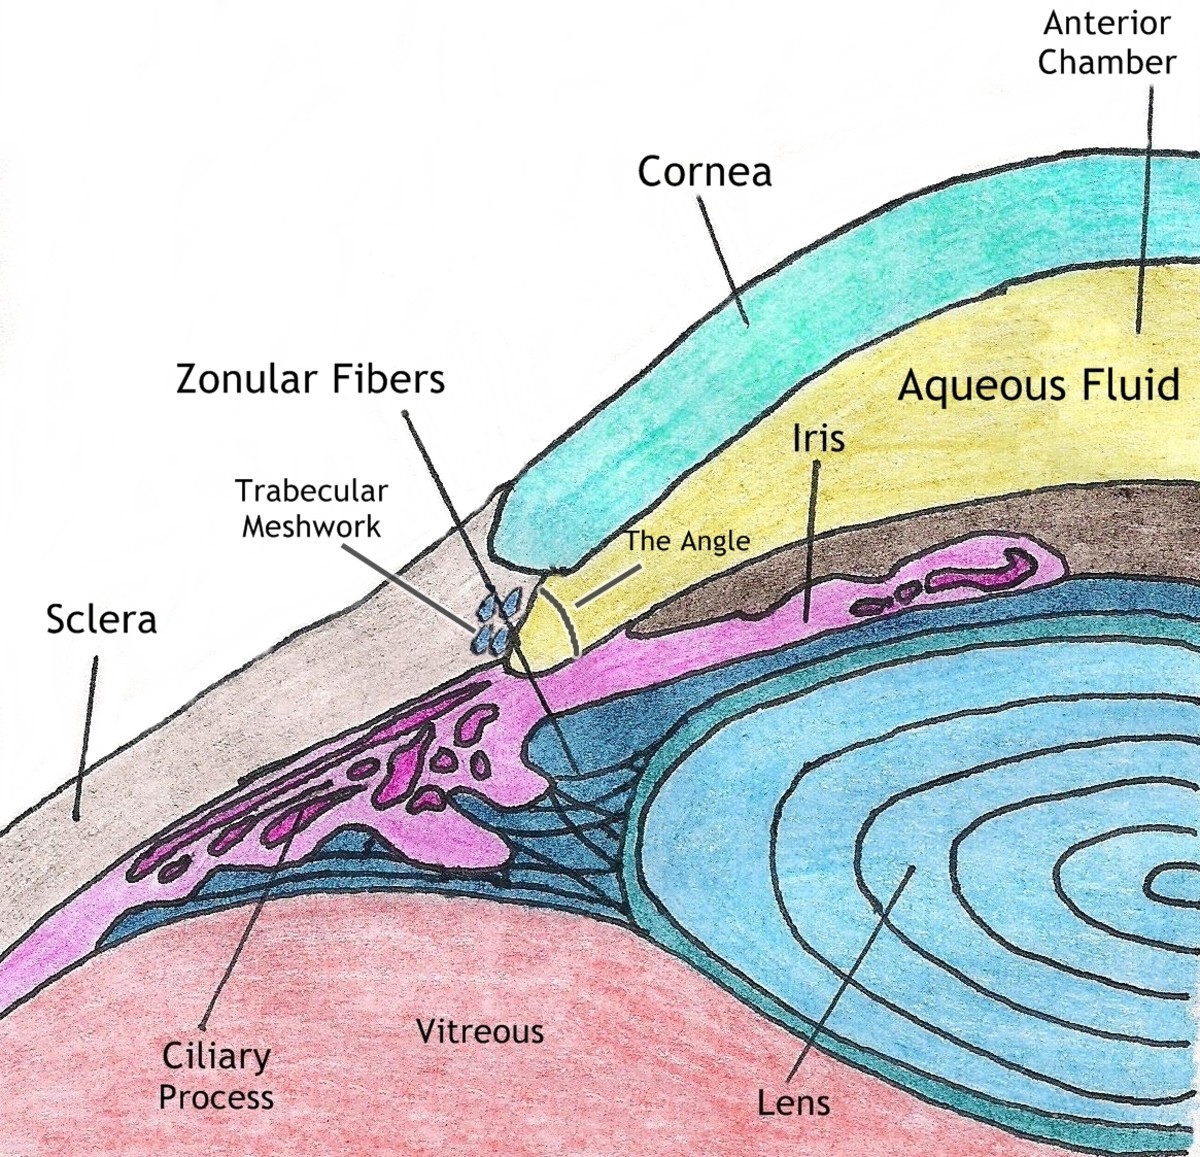 The structures of the anterior chamber showing the trabecular meshwork through which the aqueous fluid drains.